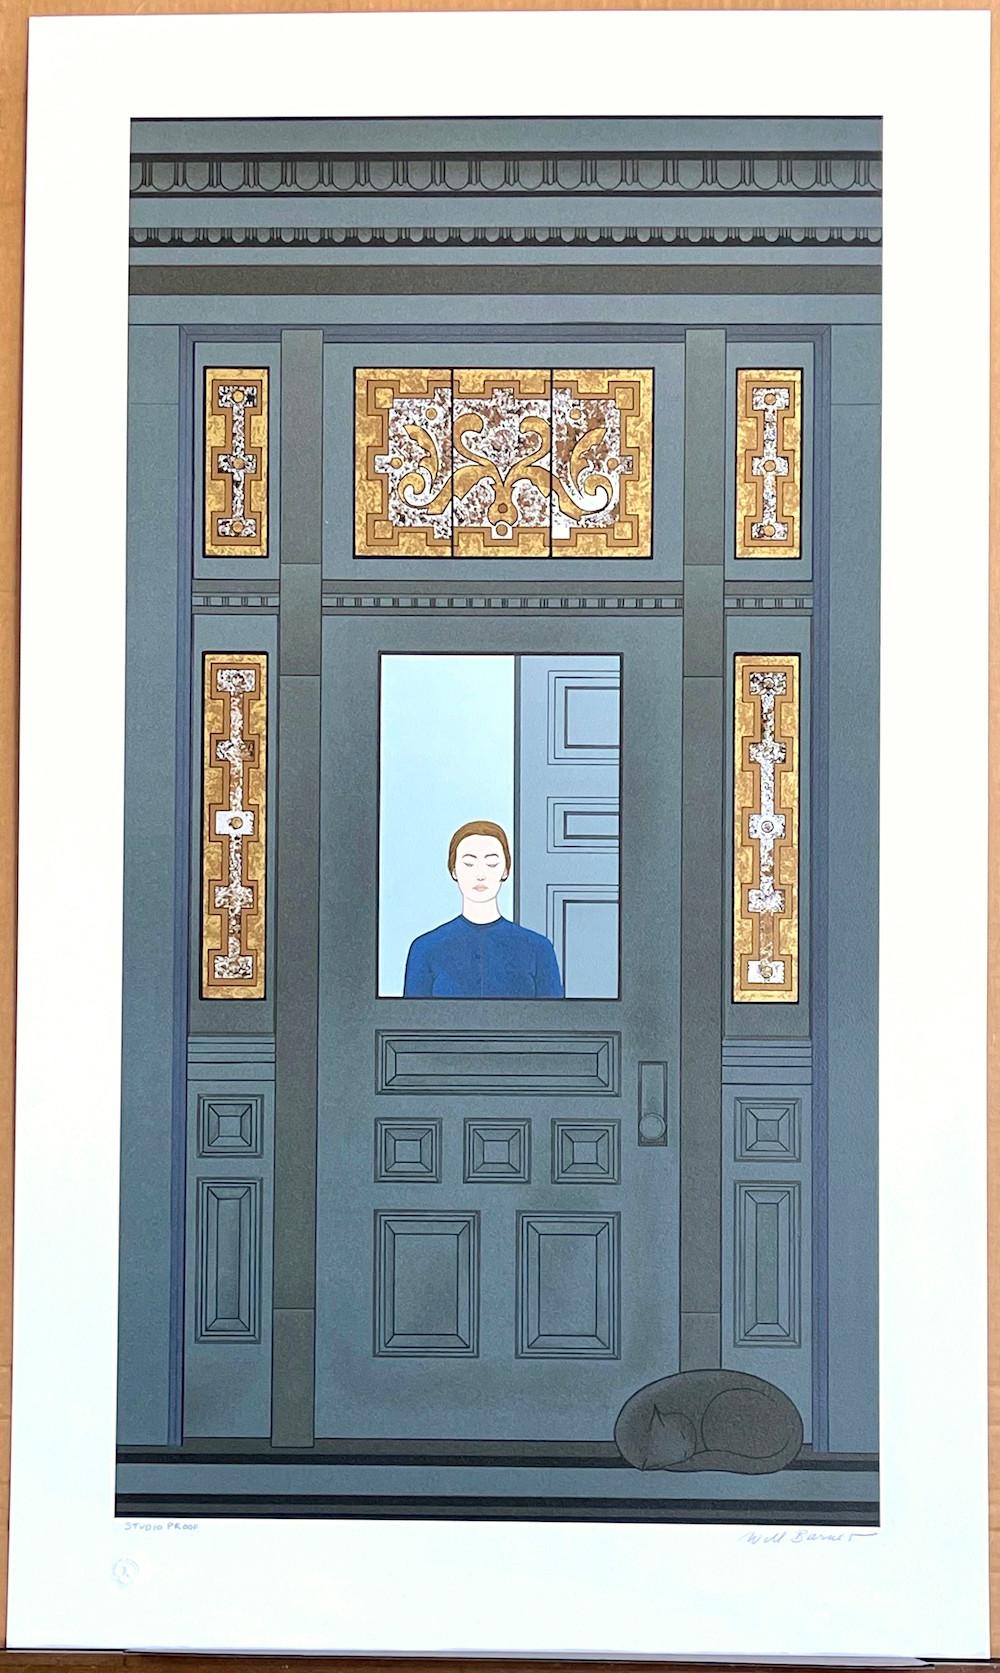 THE DOORWAY Signed Lithograph, Woman, Sleeping Cat, Victorian Stained Glass  - Contemporary Print by Will Barnet